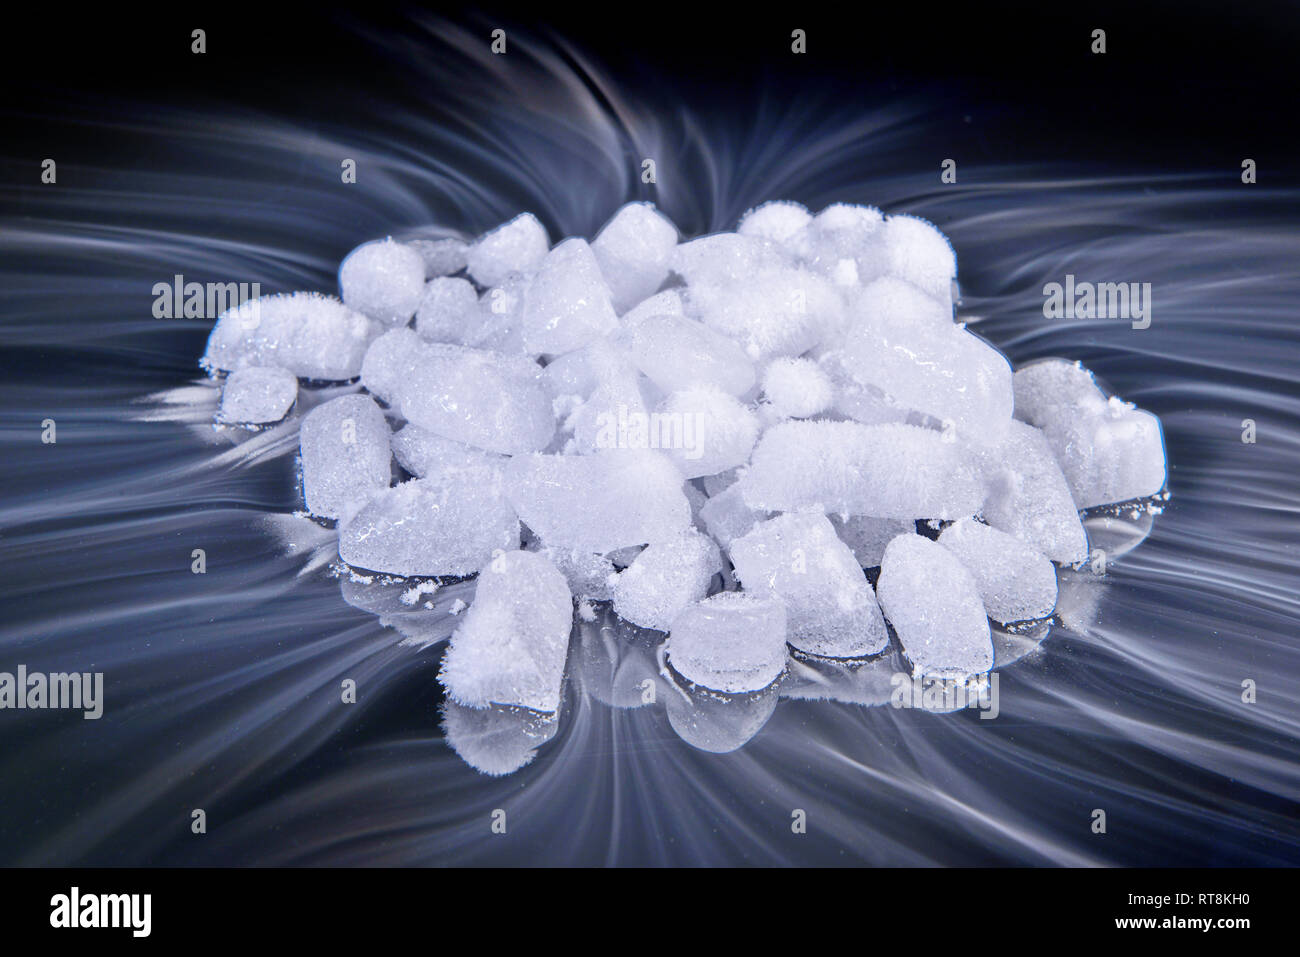 Dry ice - Stock Image - C050/5086 - Science Photo Library